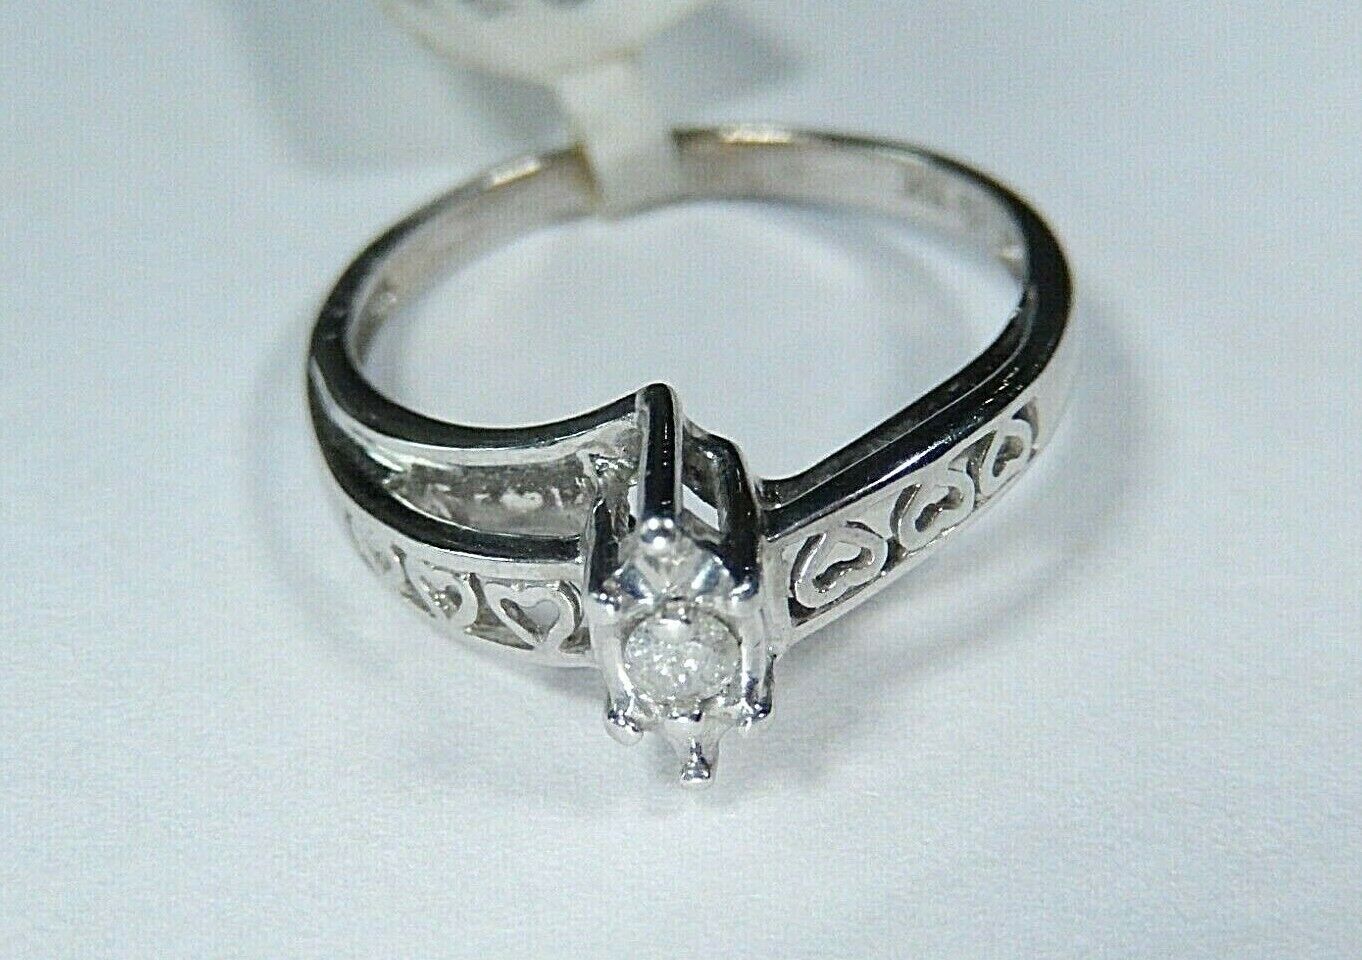 *VINTAGE* 10K White Gold Round Natural Diamond Solitaire Engagement Ring Sz 7.25